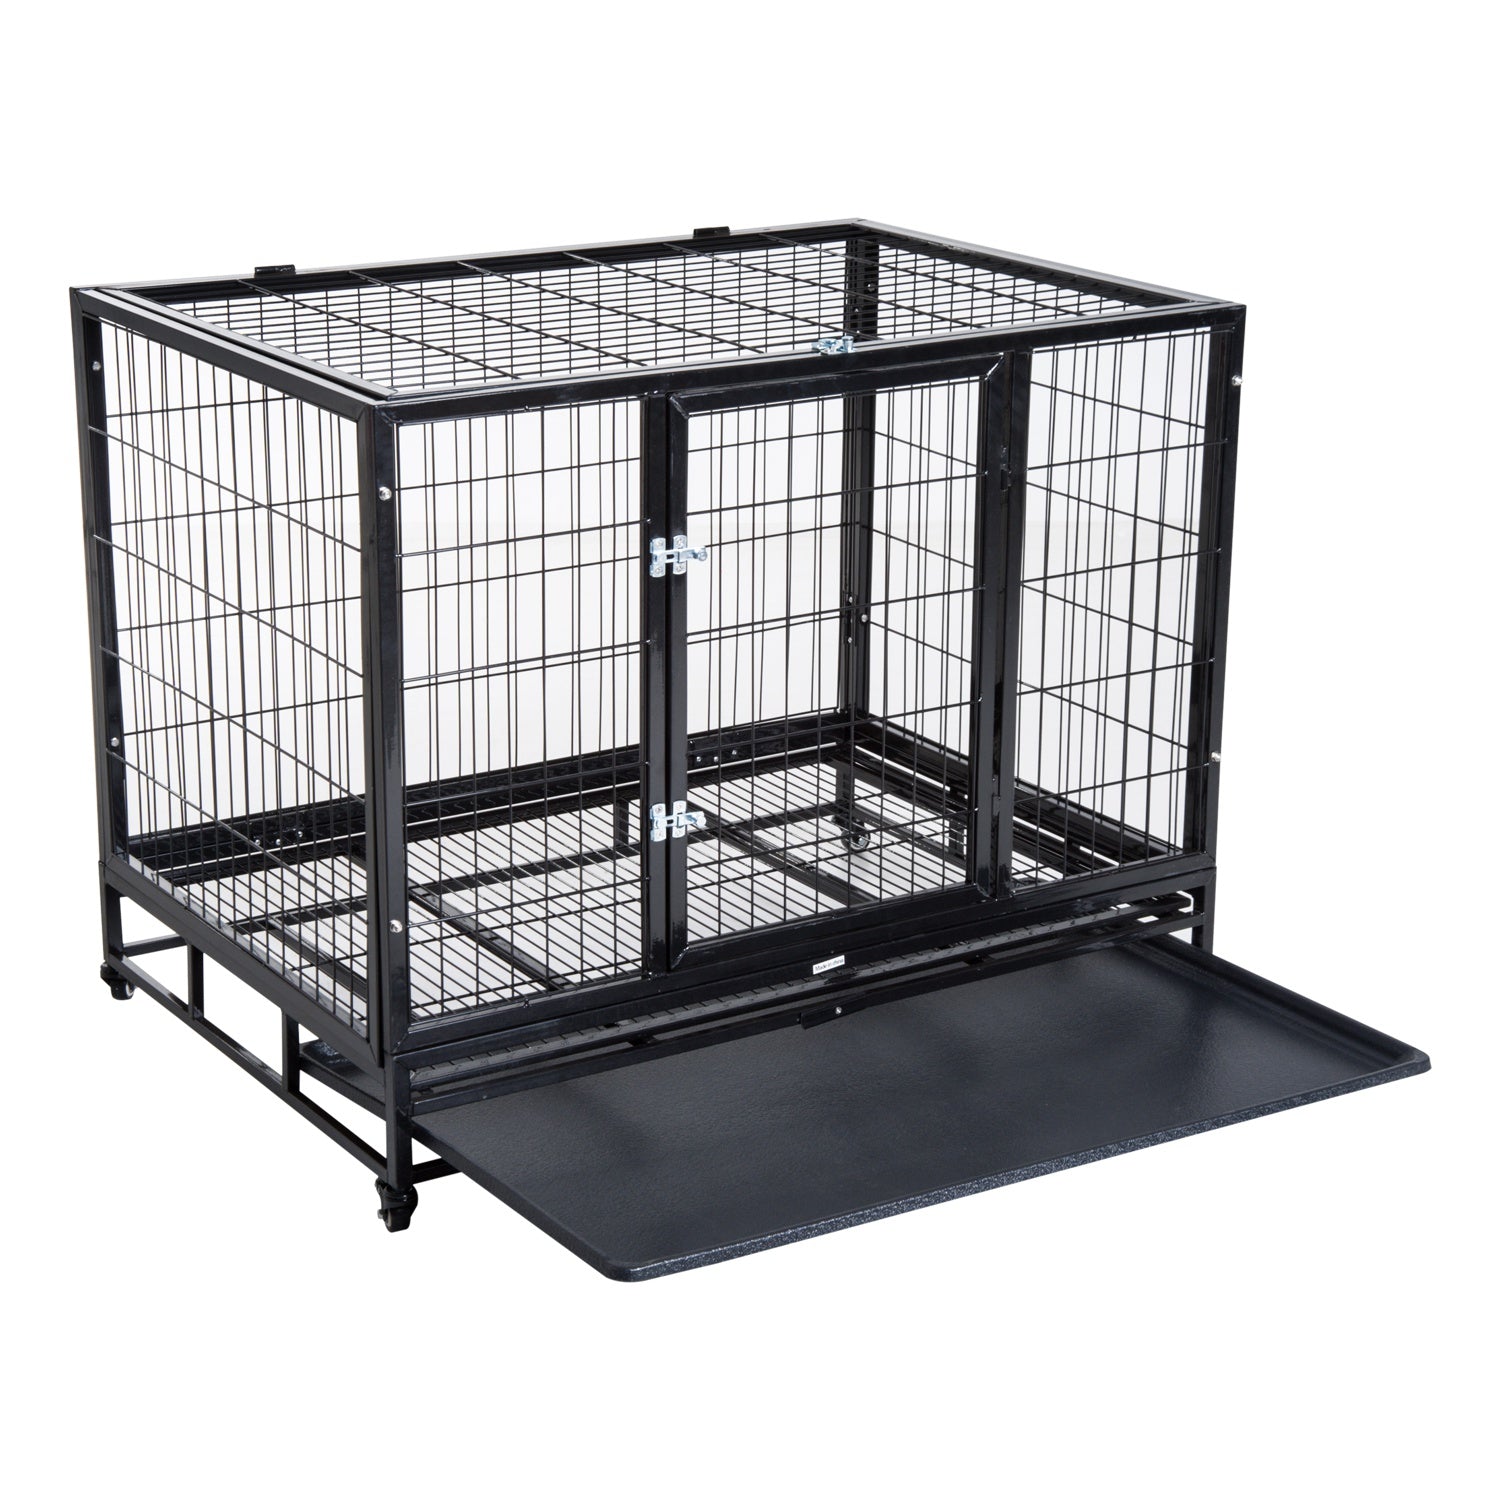 Metal Kennel Cage W/Wheels and Crate Tray, 95Lx61.5Wx68.5H cm